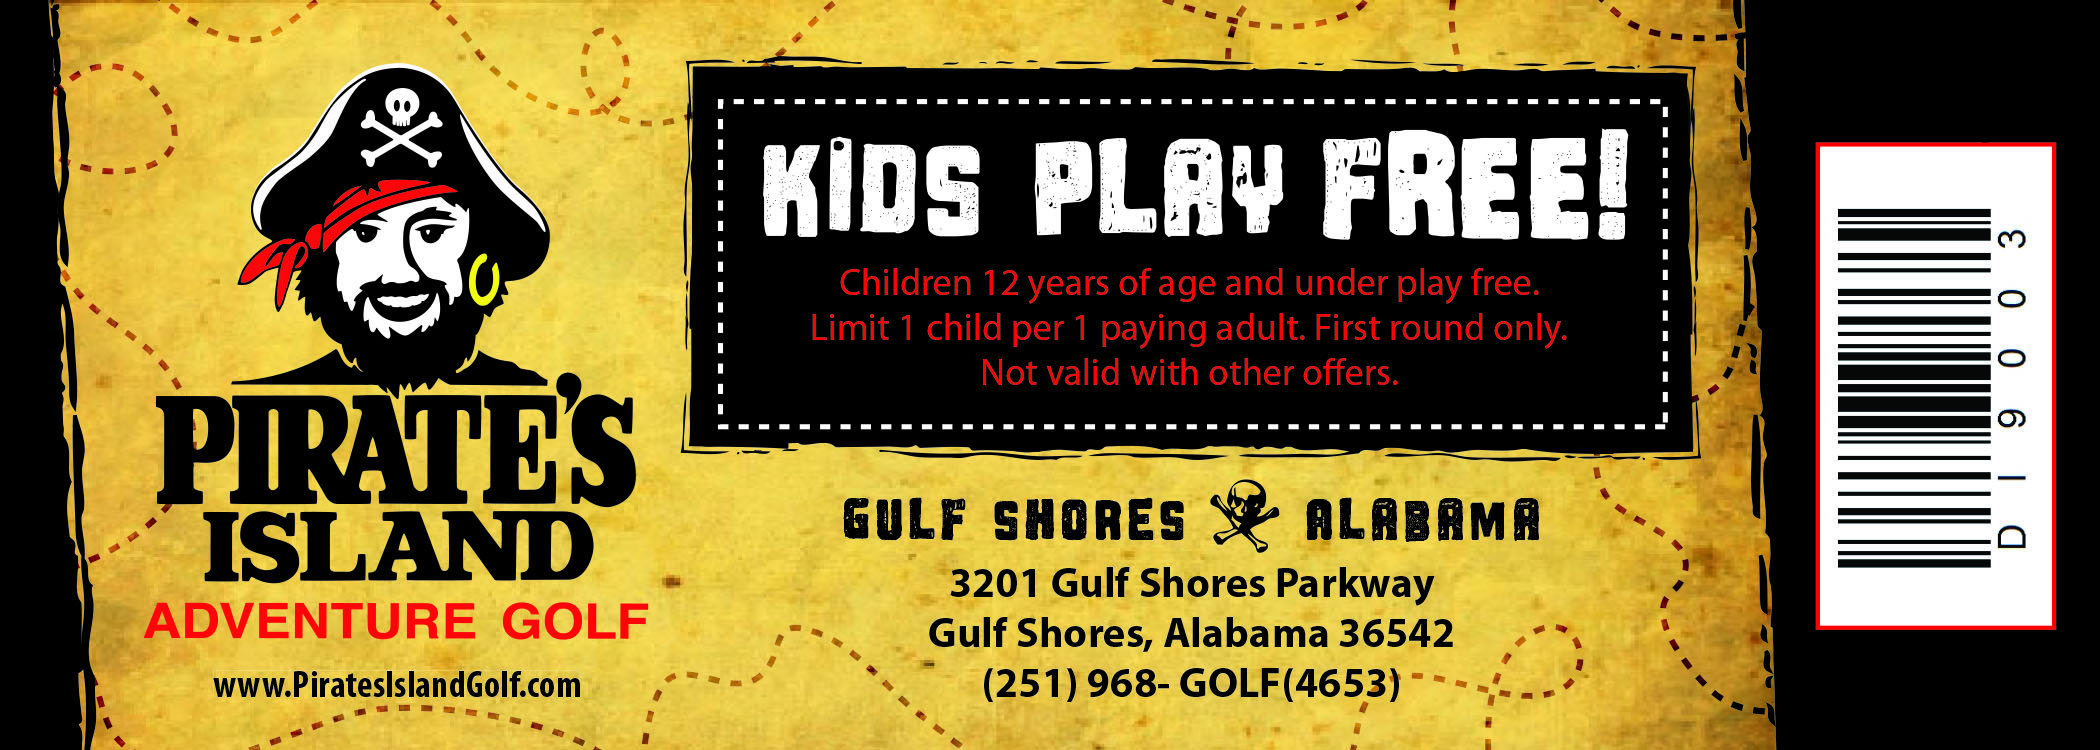 Kid's play for FREE